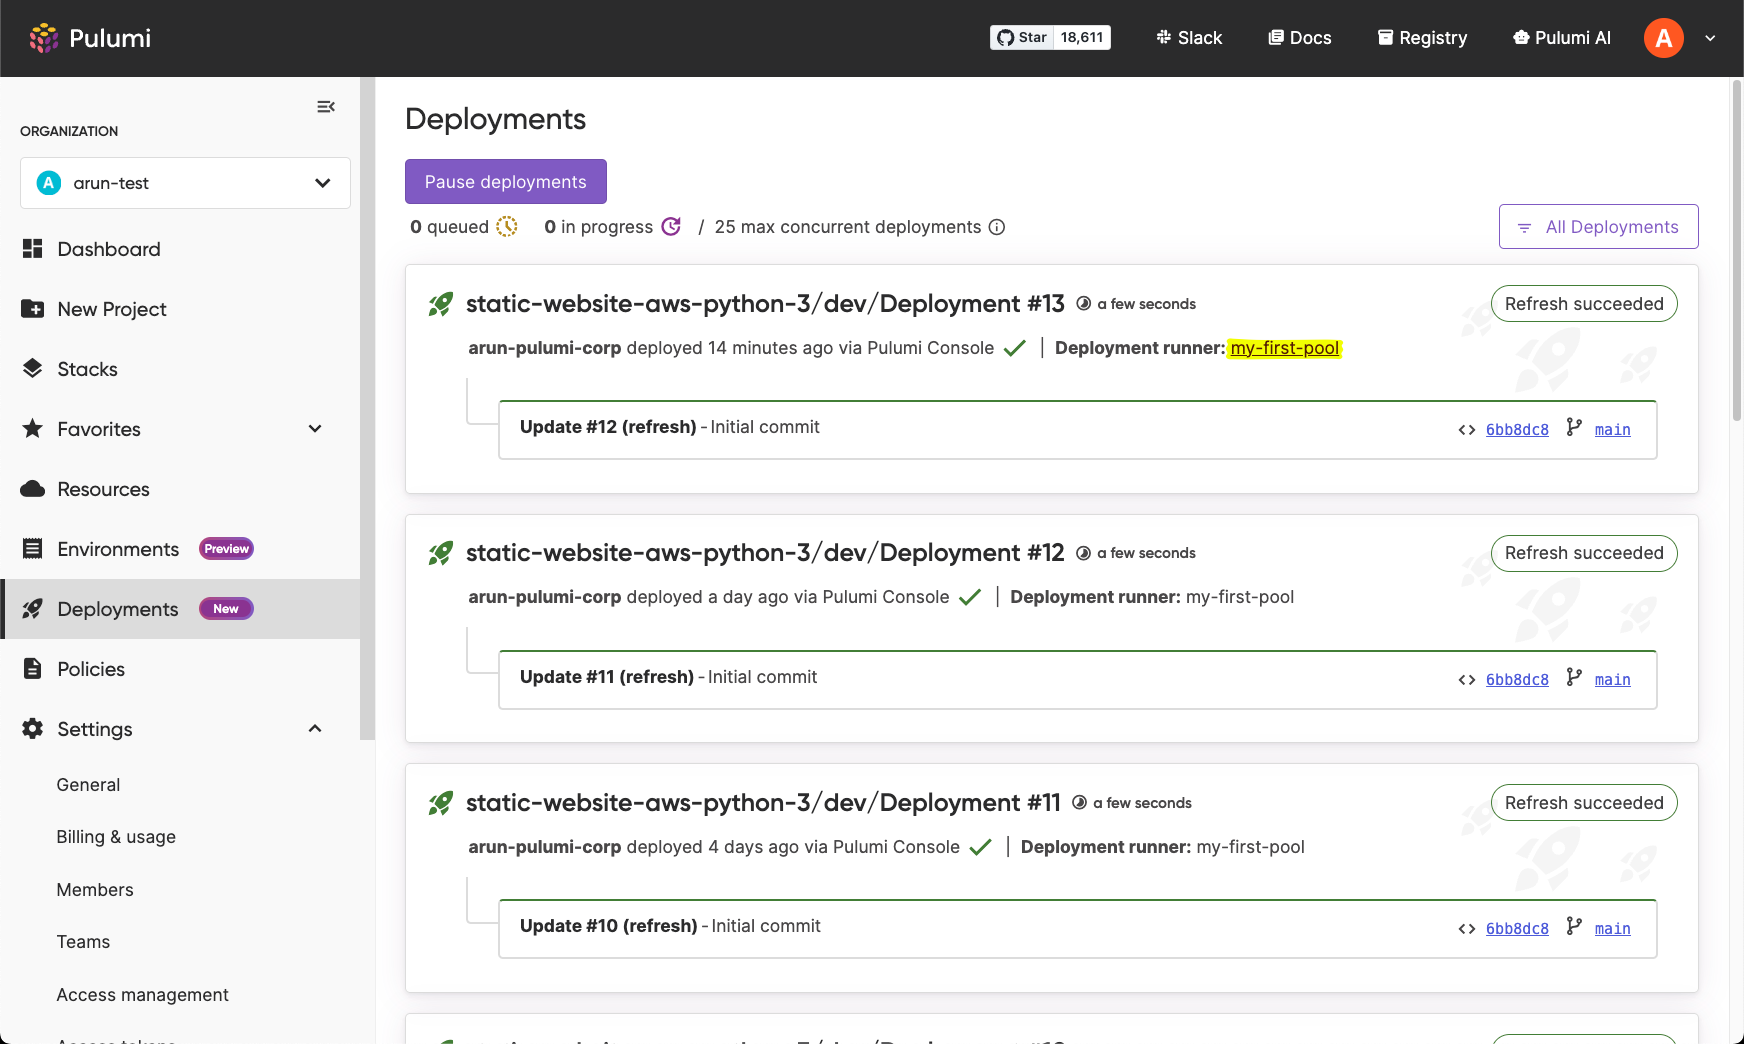 Deployments page